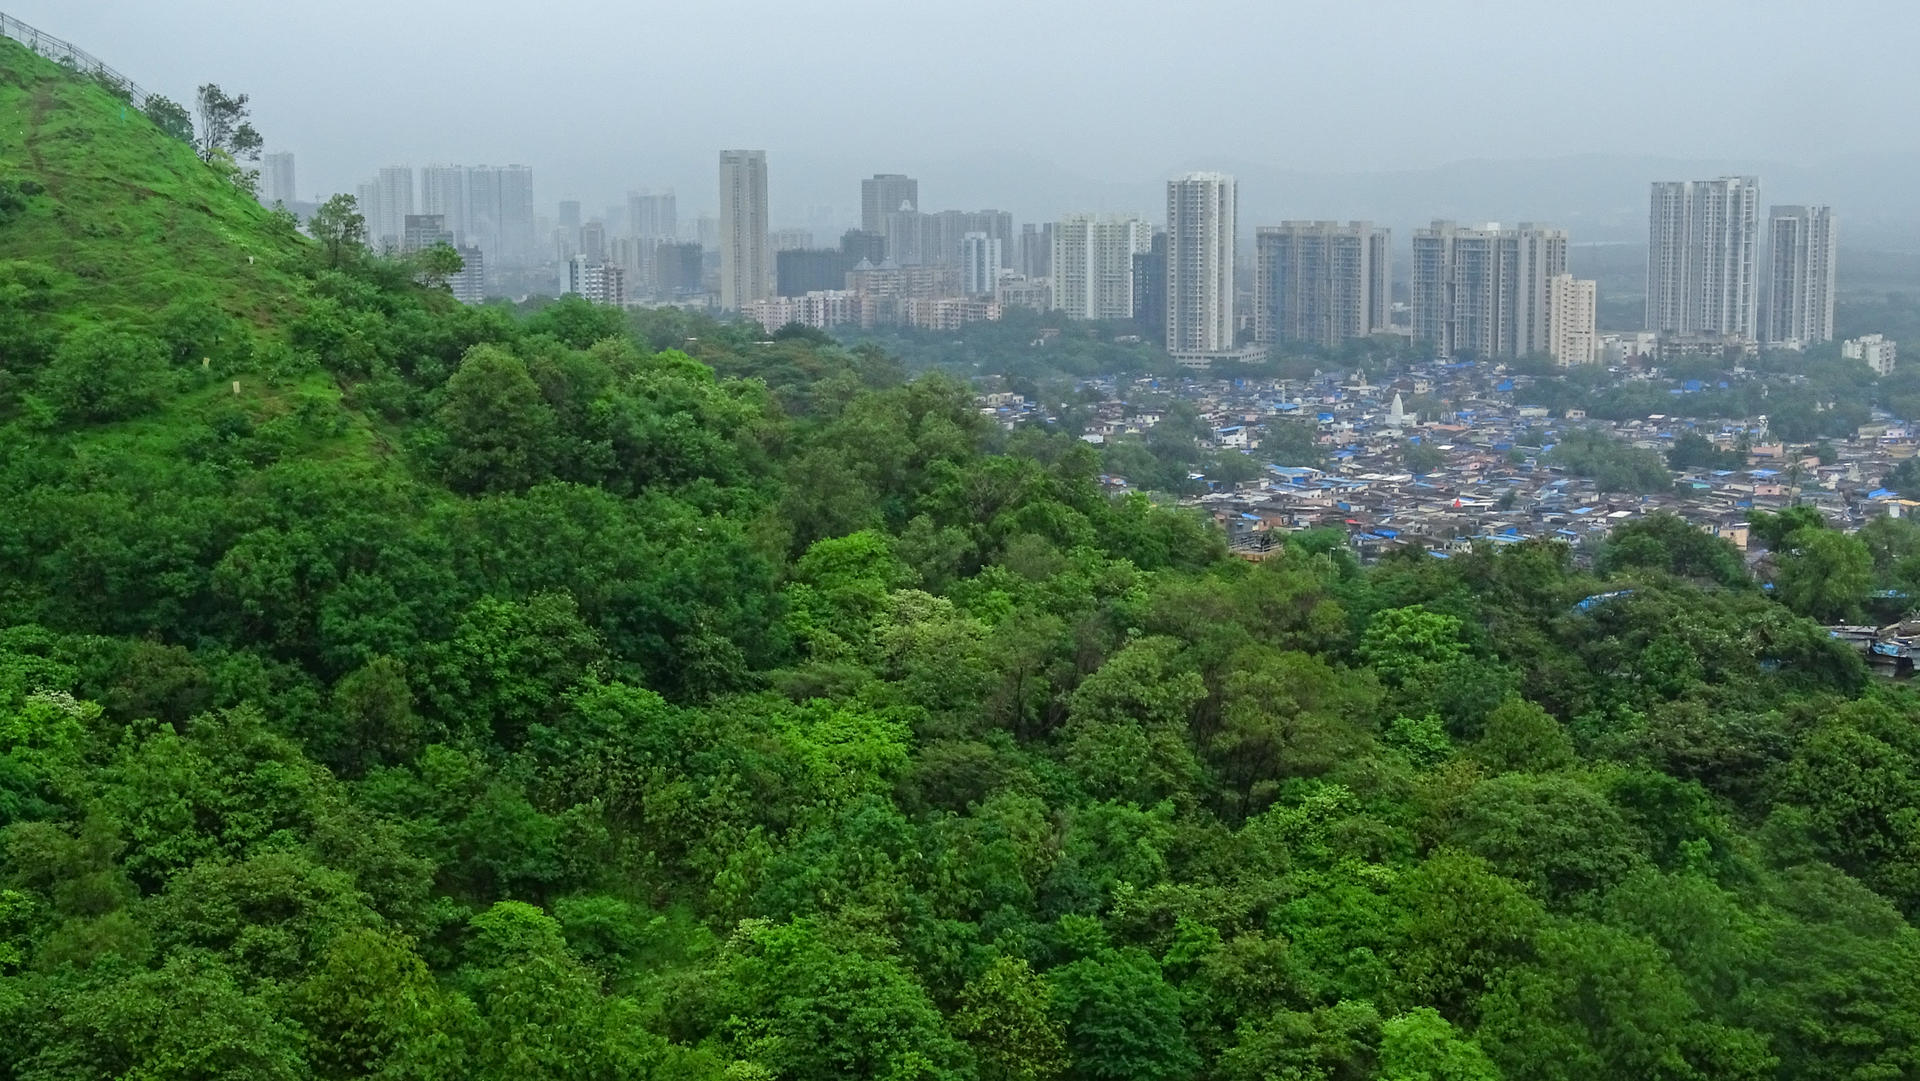 A green hill against an urban city in the background